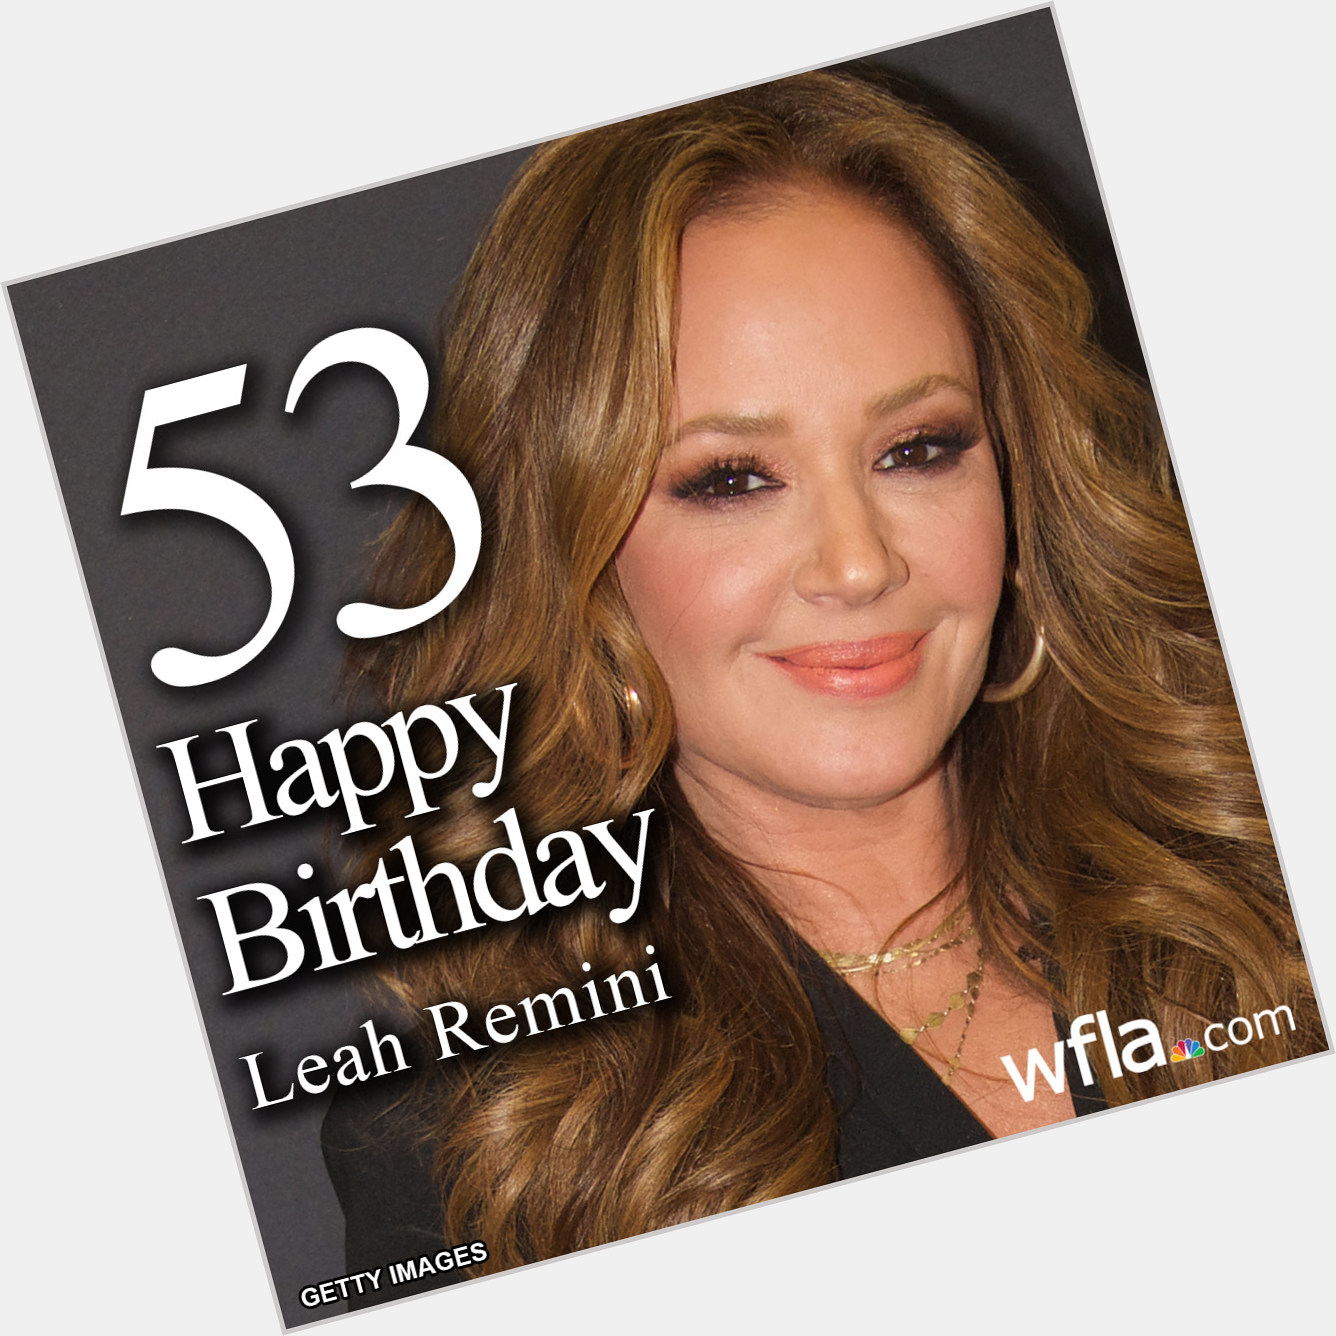 HAPPY BIRTHDAY, LEAH REMINI The Emmy Award-winning actress turns 53 today!  